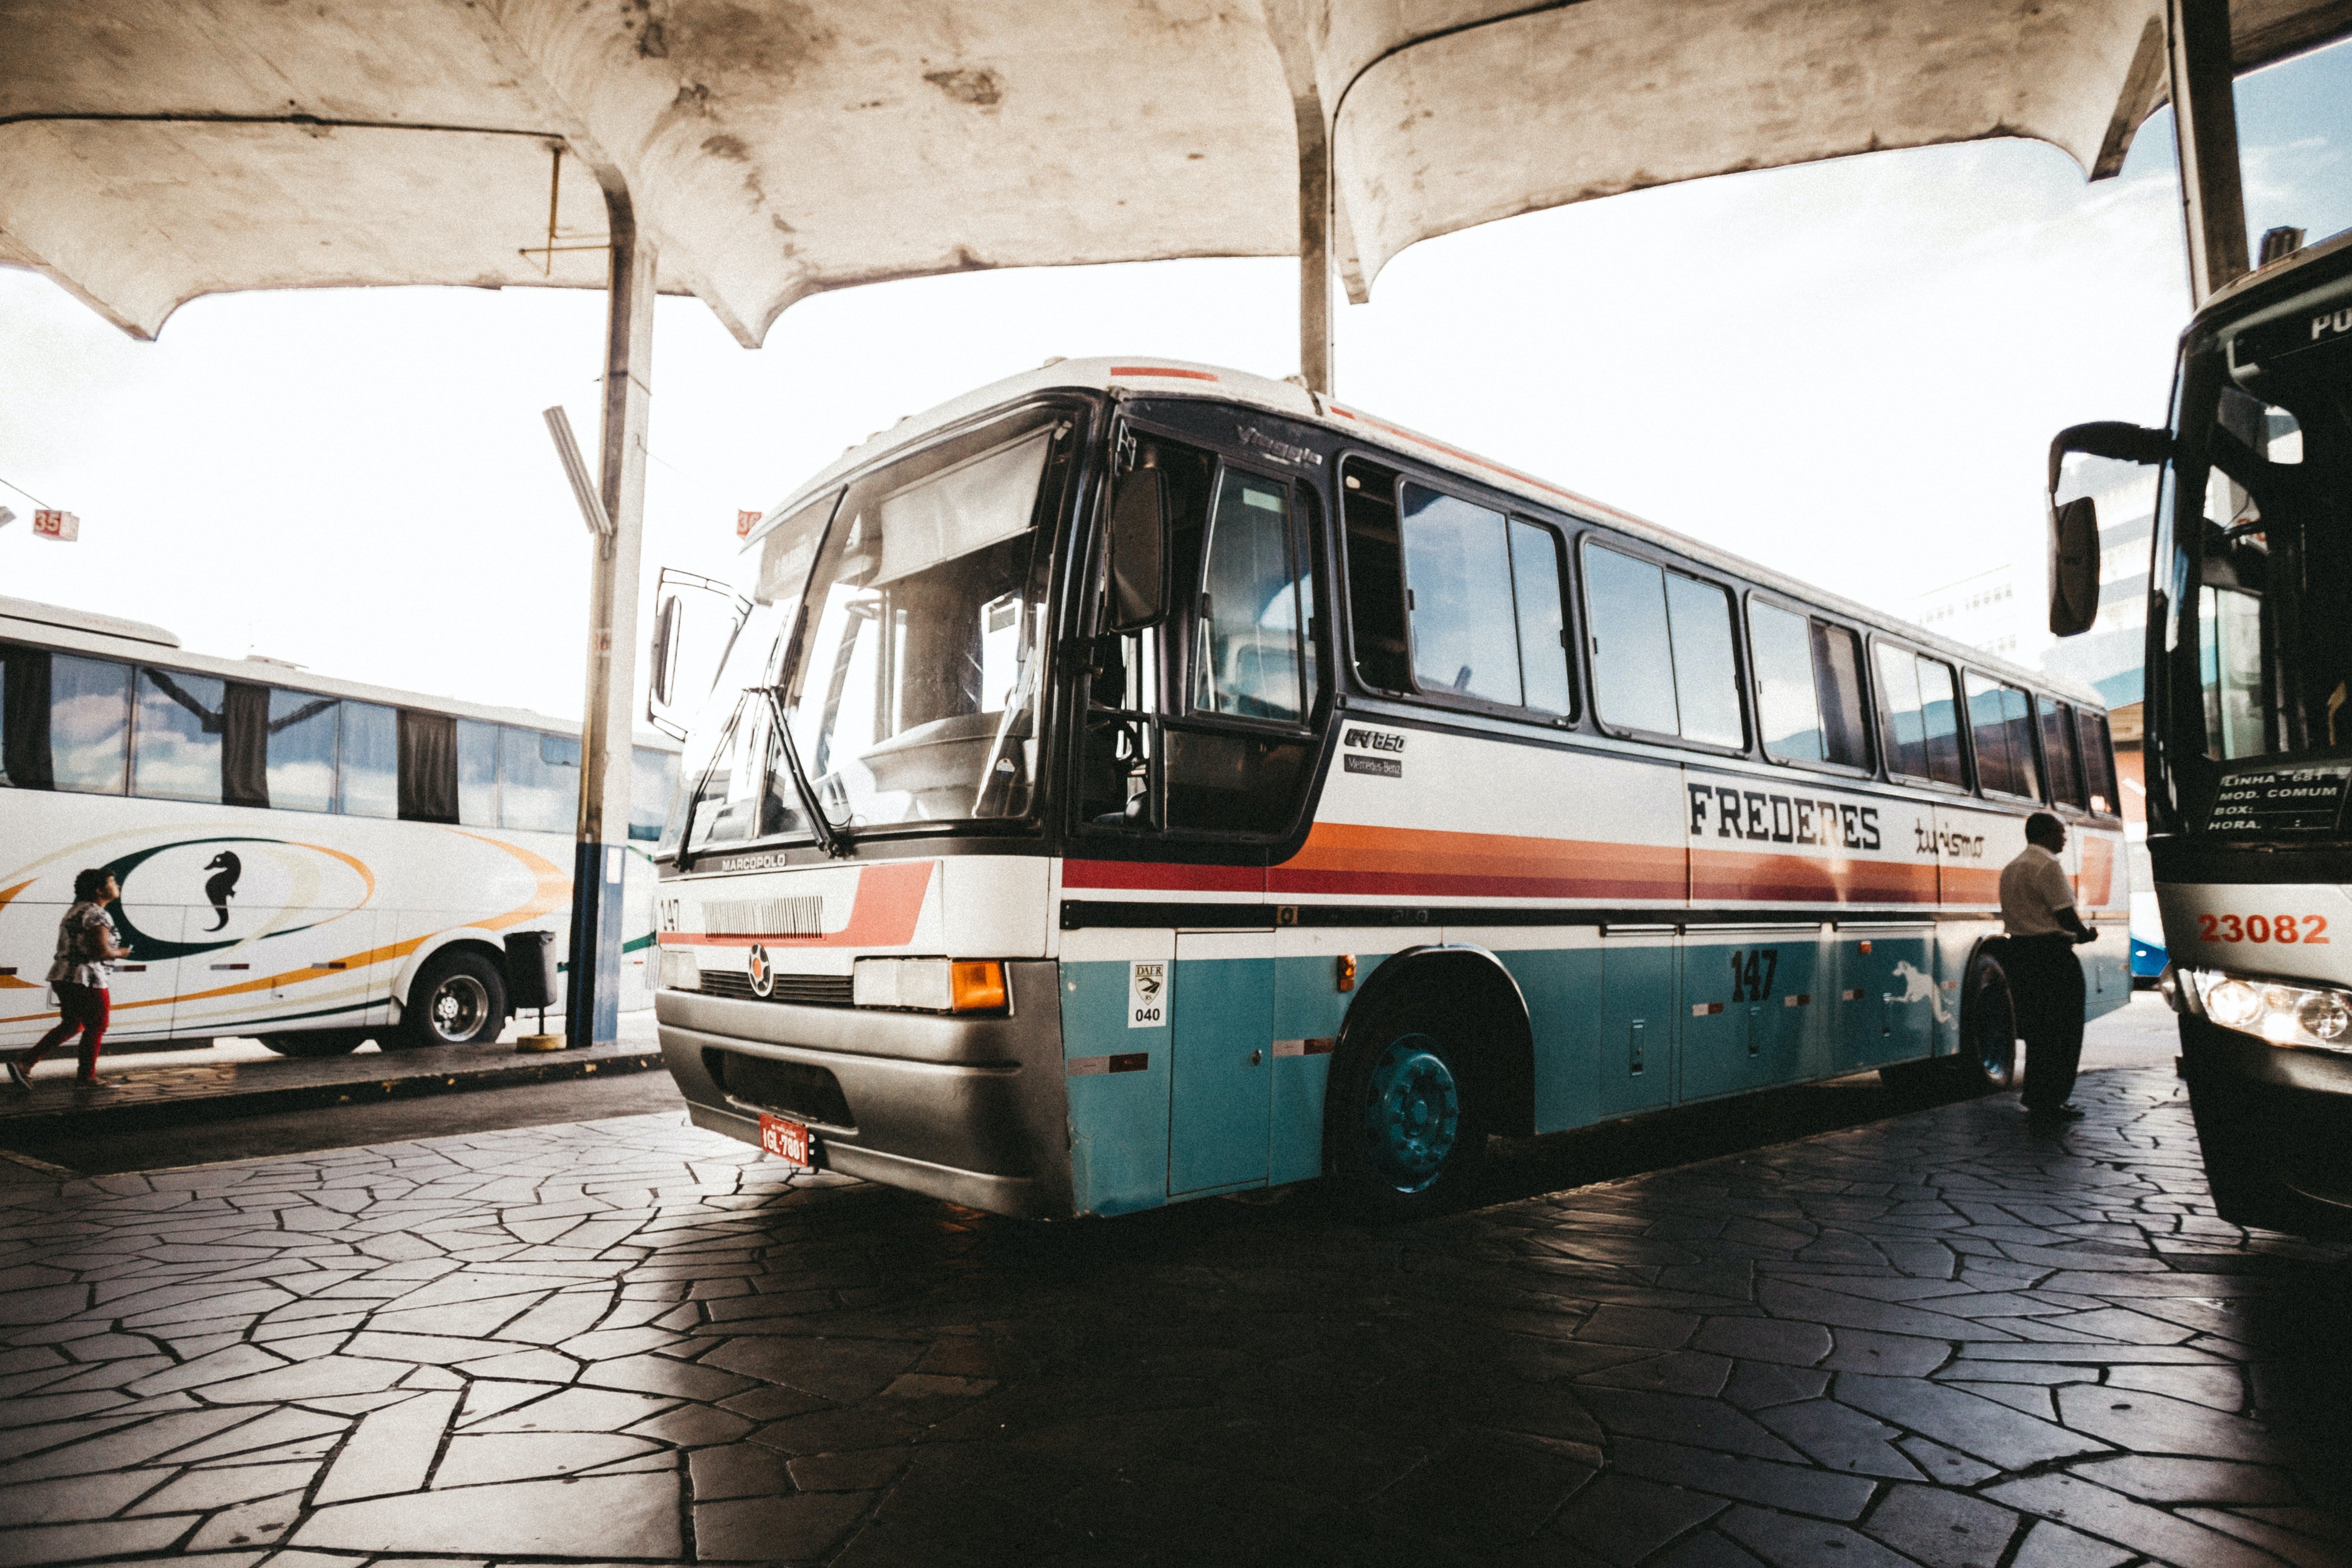 A bus standing at a station. | Source: Pexels/ Jonathan Borba